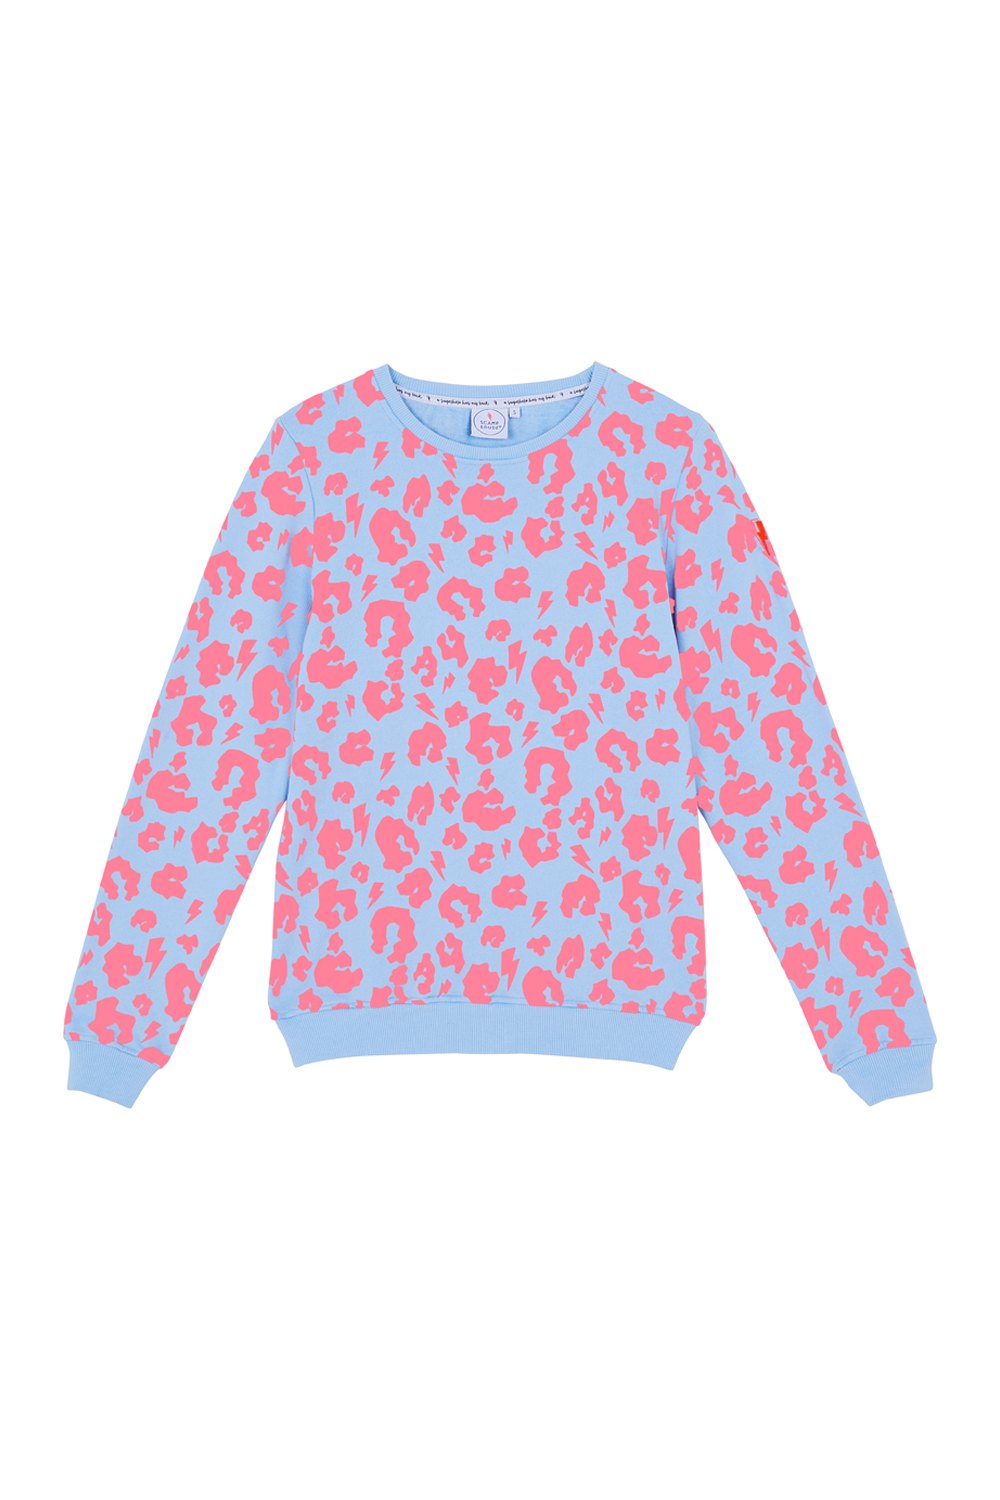 Pale Blue with Neon Coral Leopard Sweatshirt – Scamp & Dude